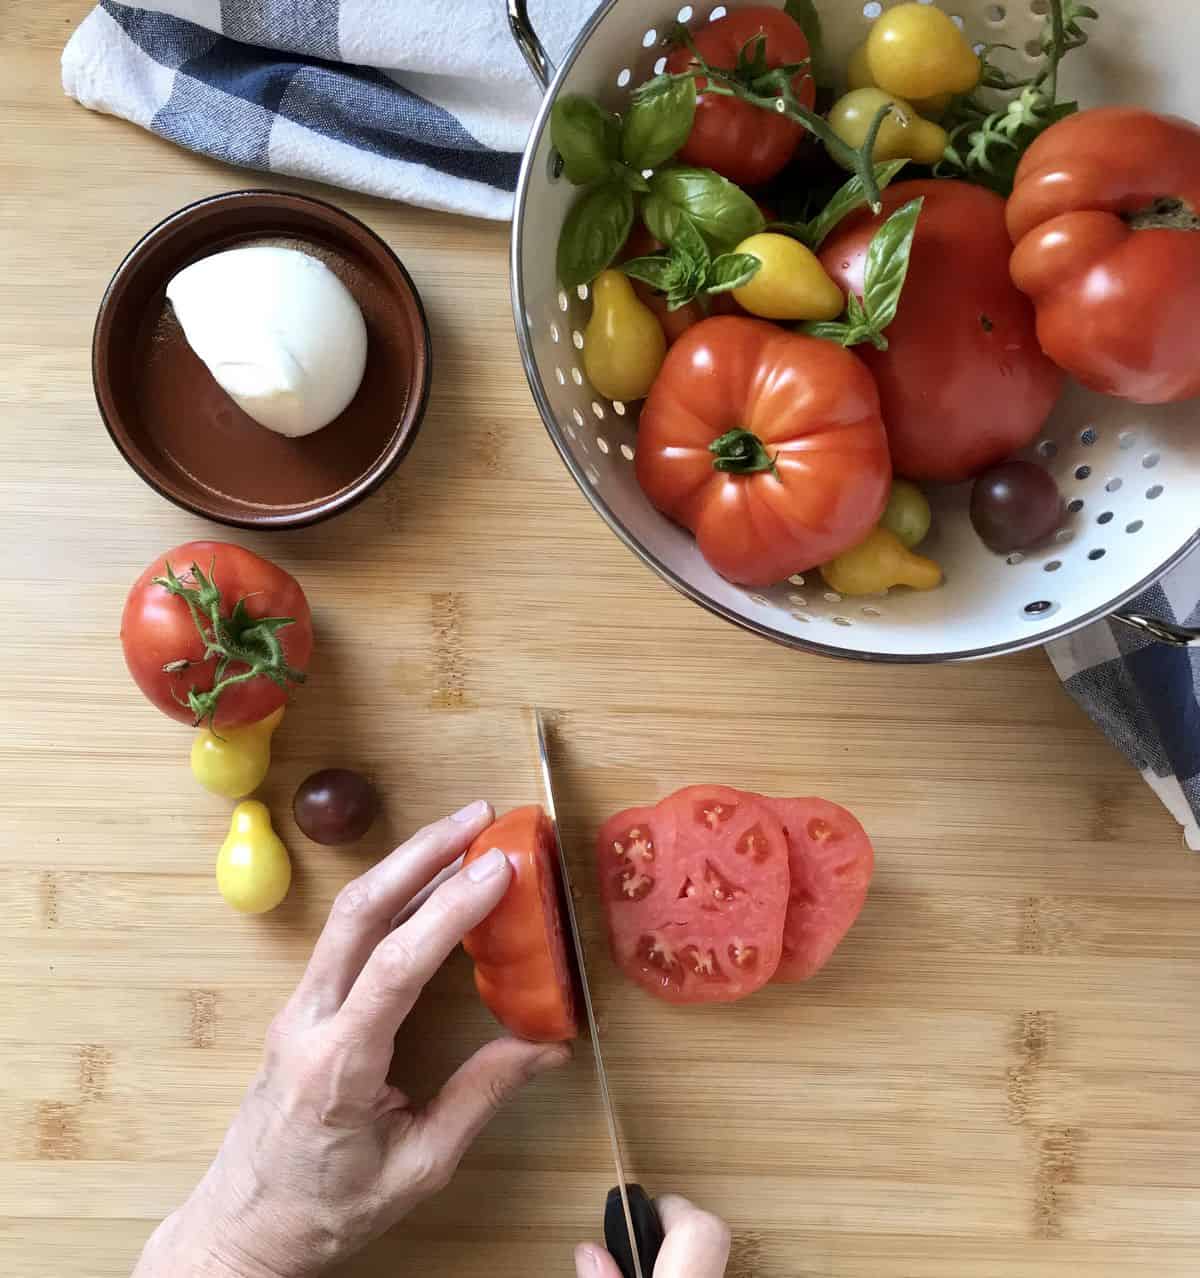 Heirloom tomatoes being sliced to make a caprese salad.